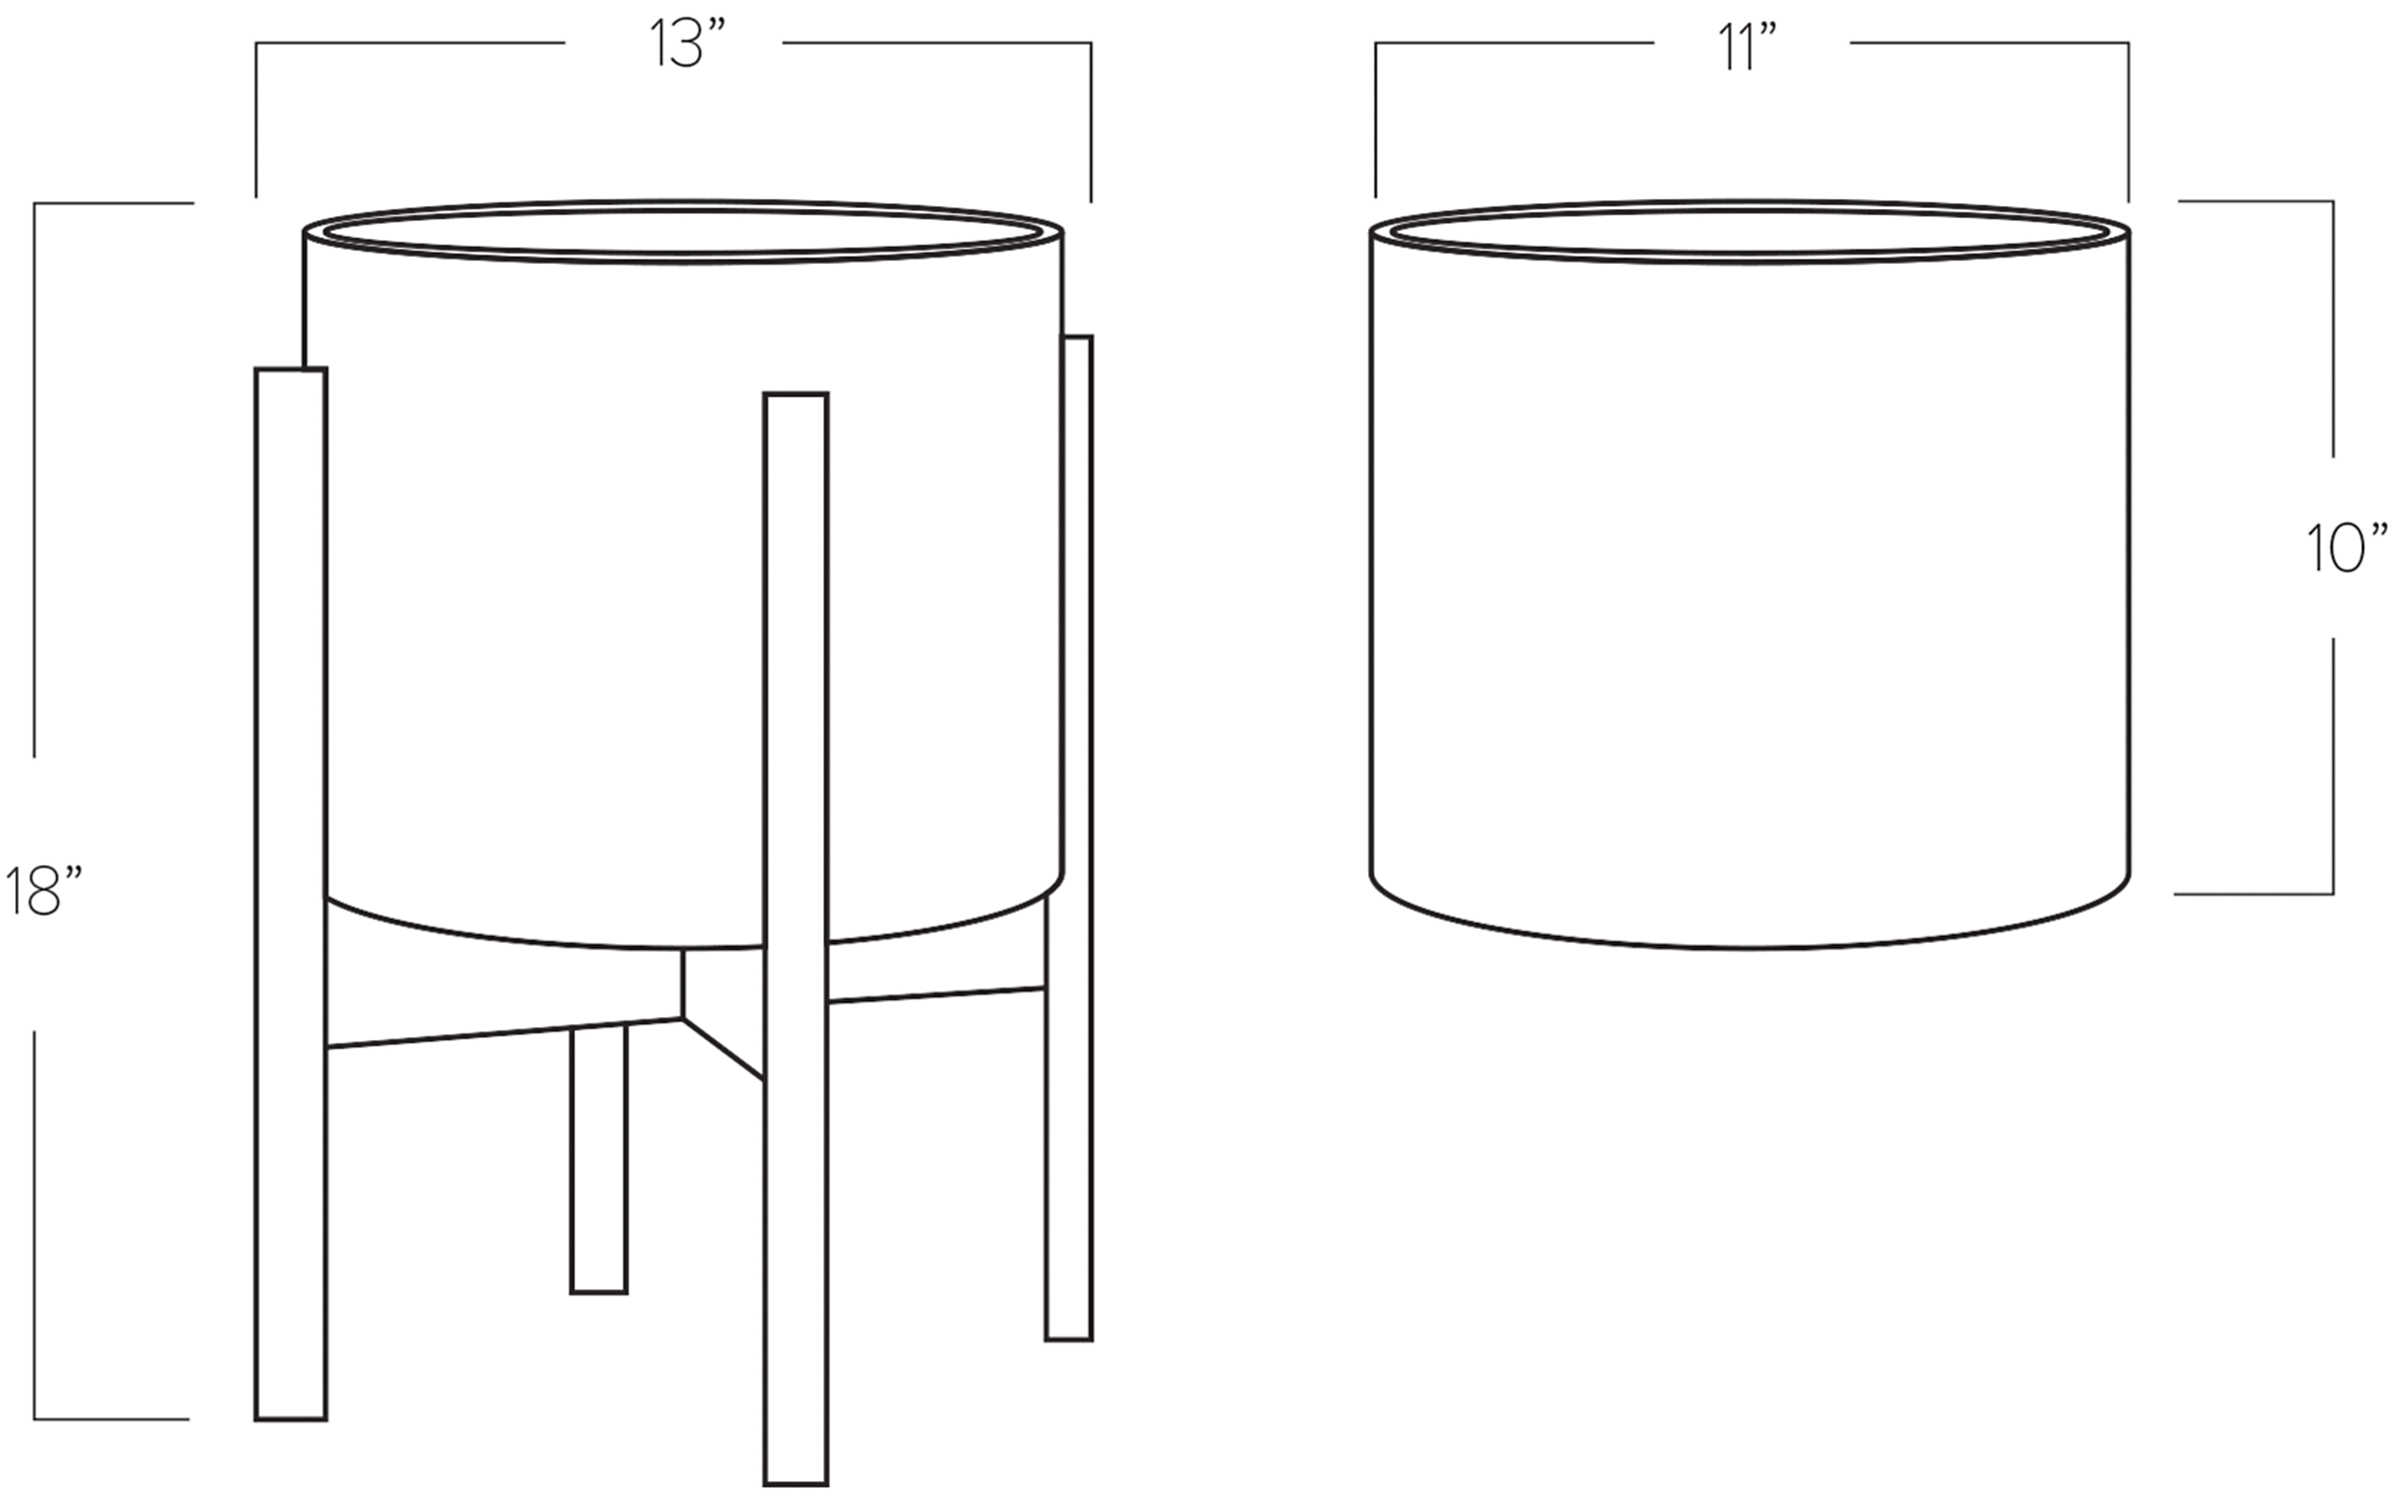 Dimension Drawing of Case Study 13w 18h 11 round Planter with Wood Stand.